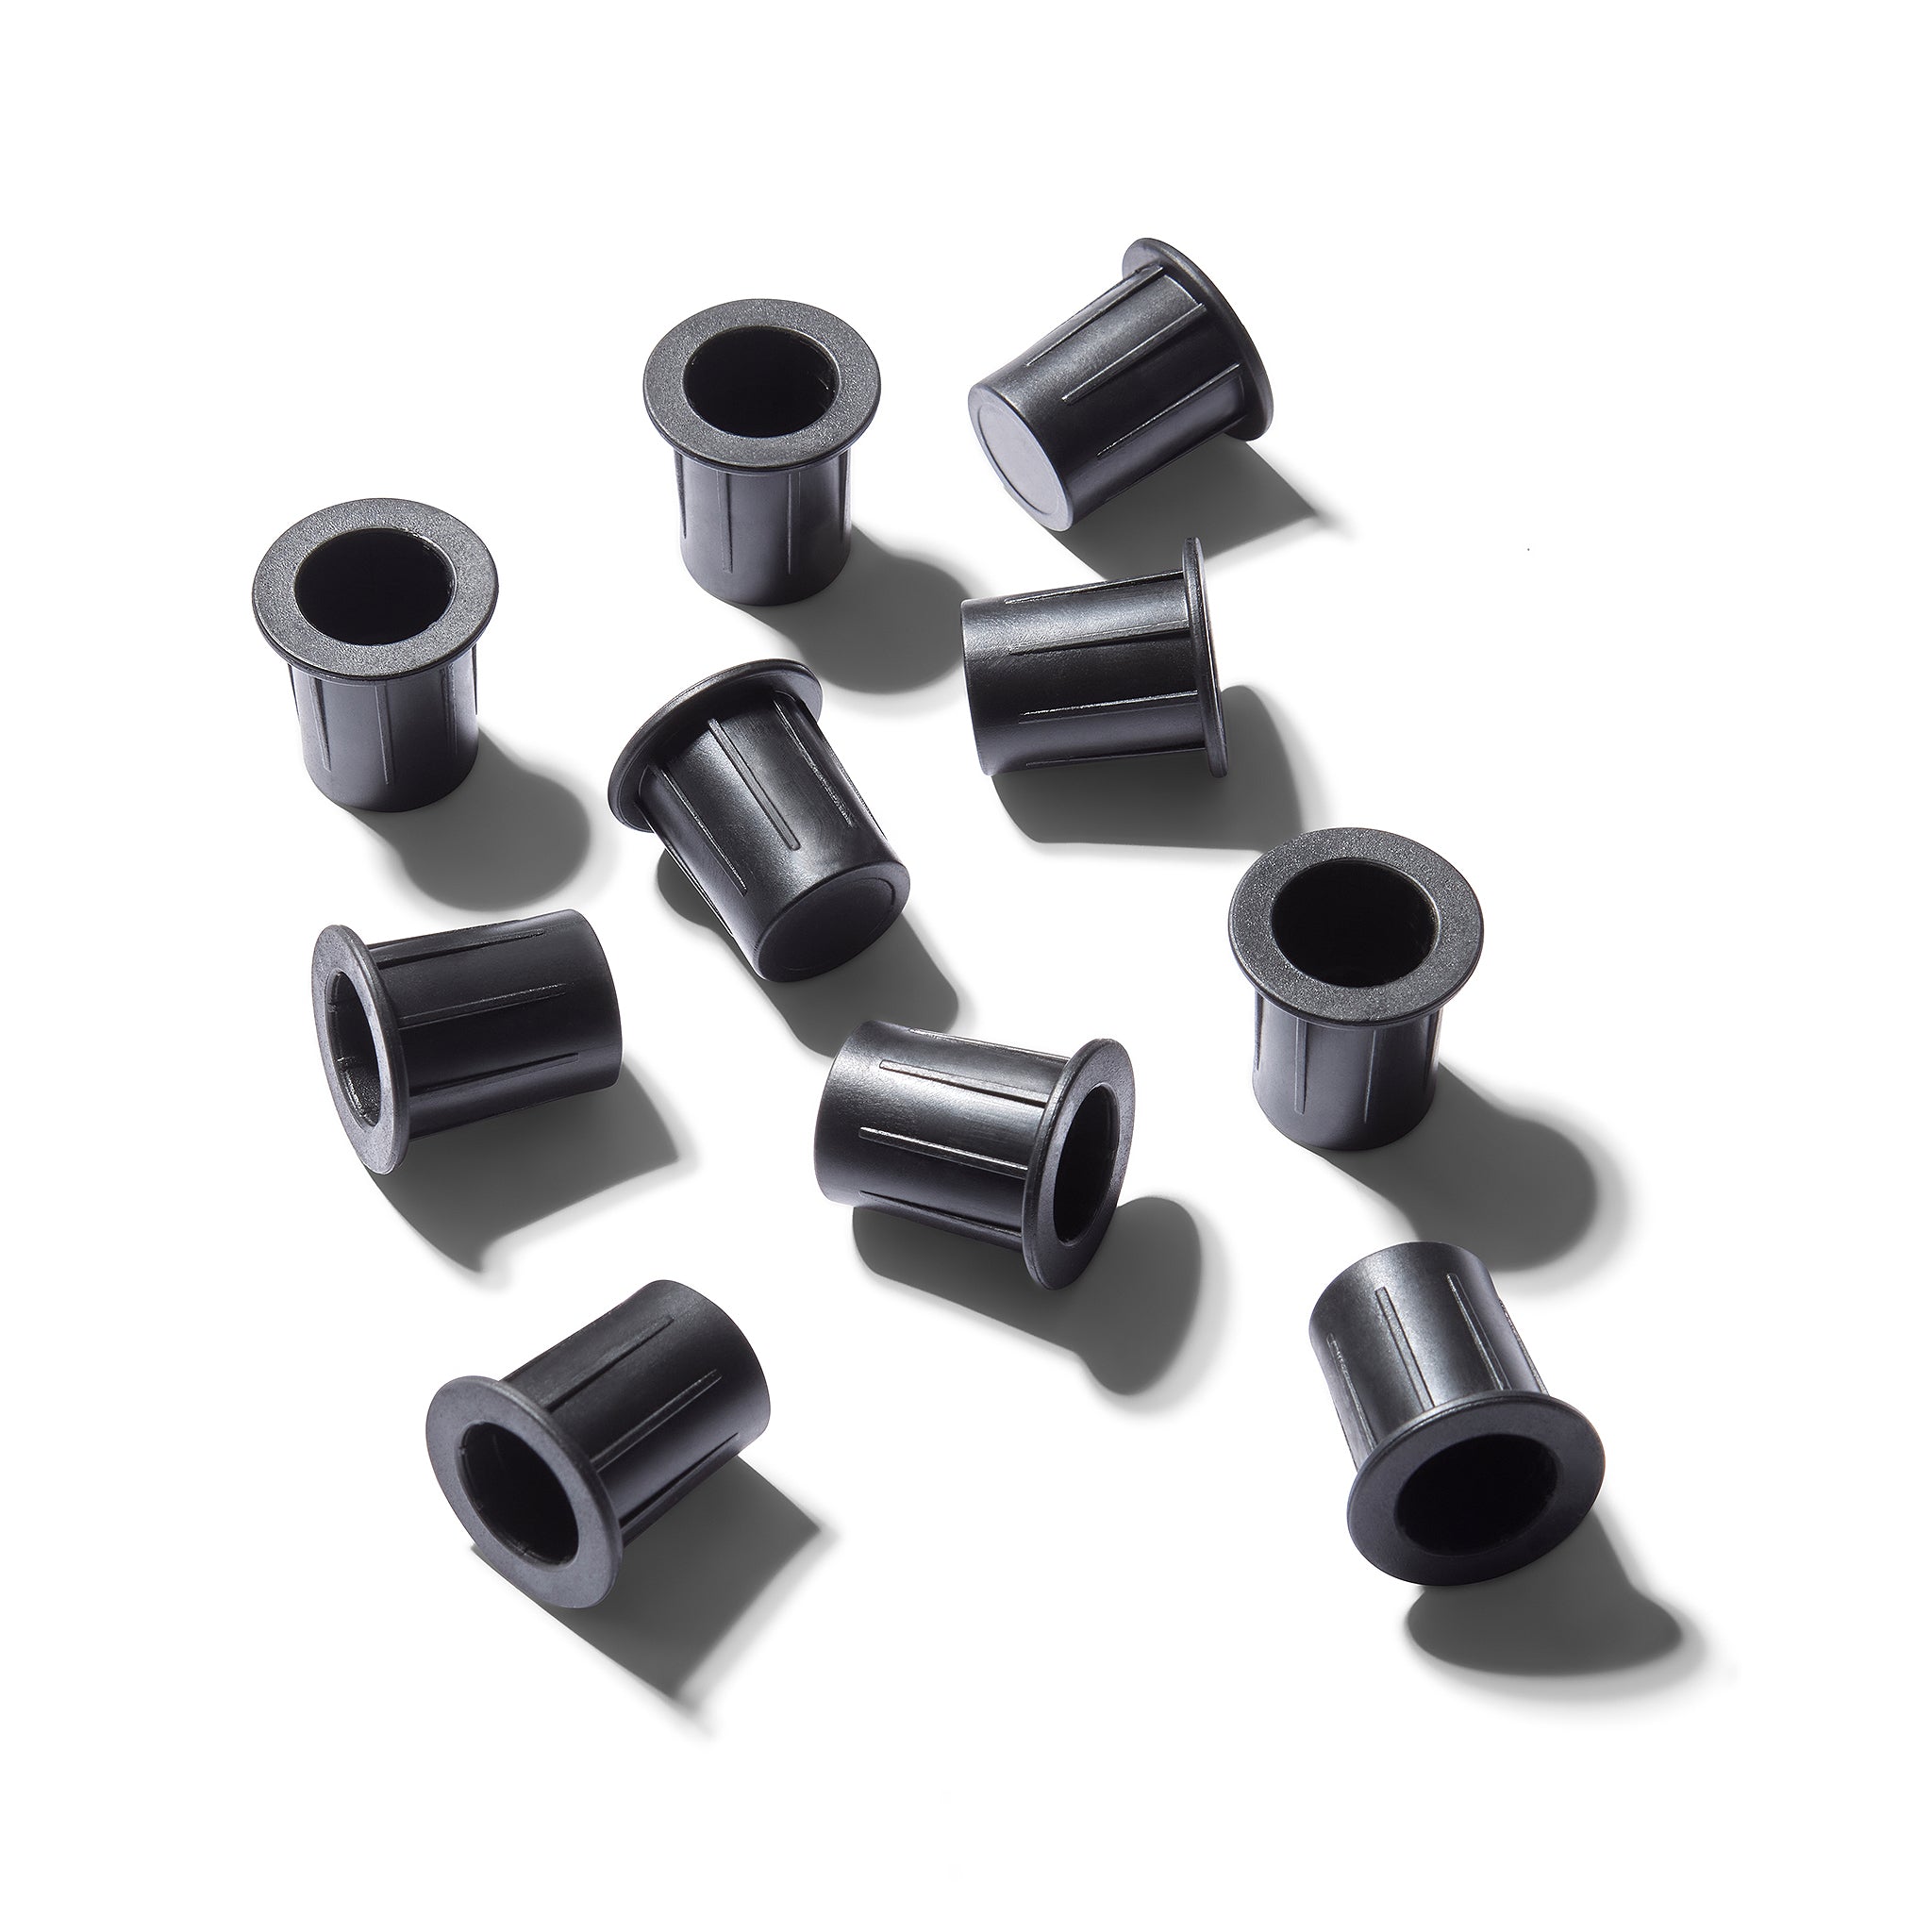 Router Bit Storage Inserts - Pack of 10